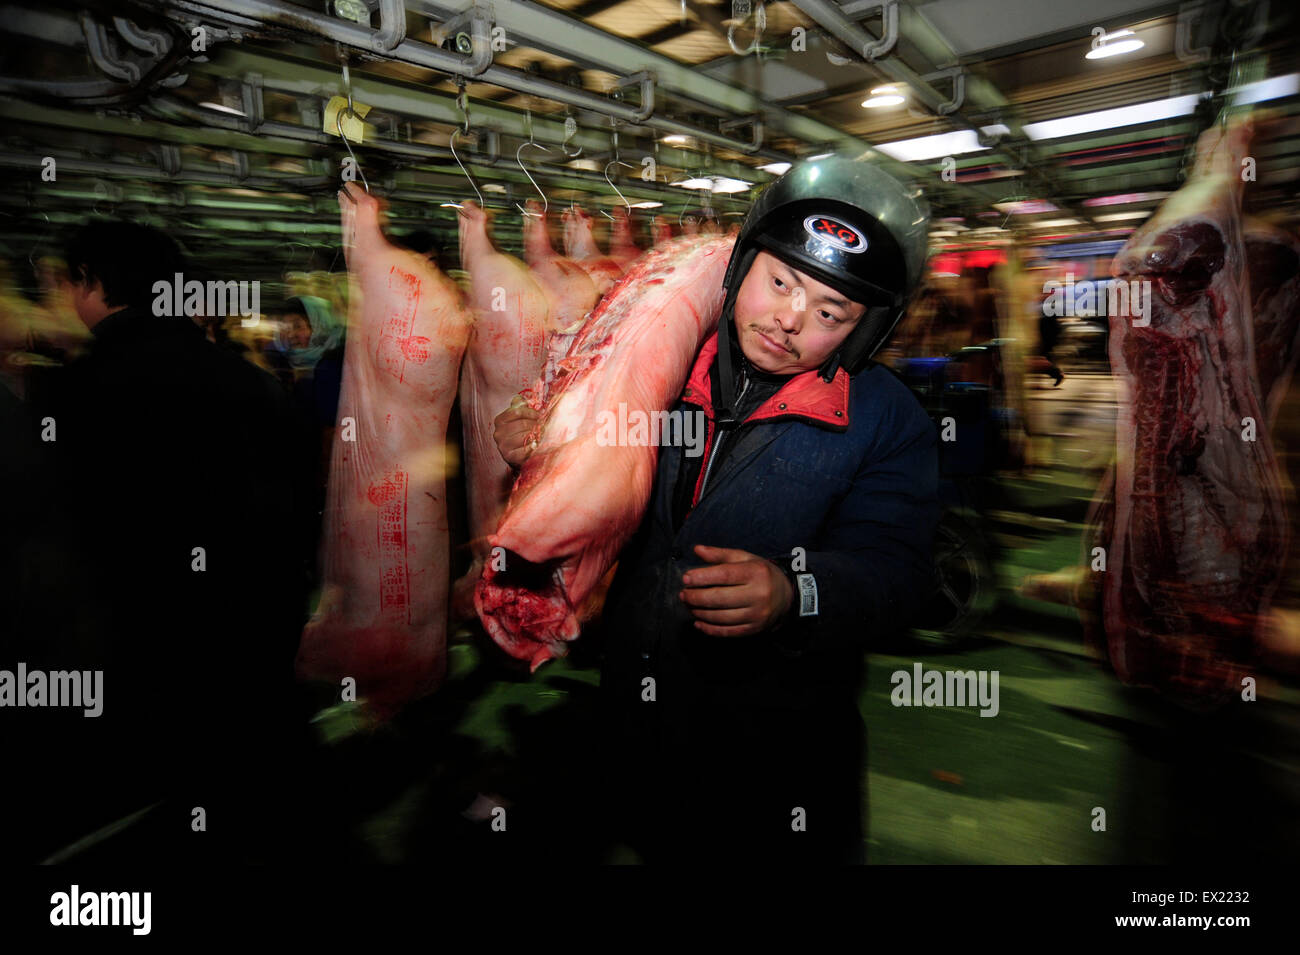 Labourers work at pork wholesale market in Hefei, Anhui province January 13, 2010. VCP Stock Photo